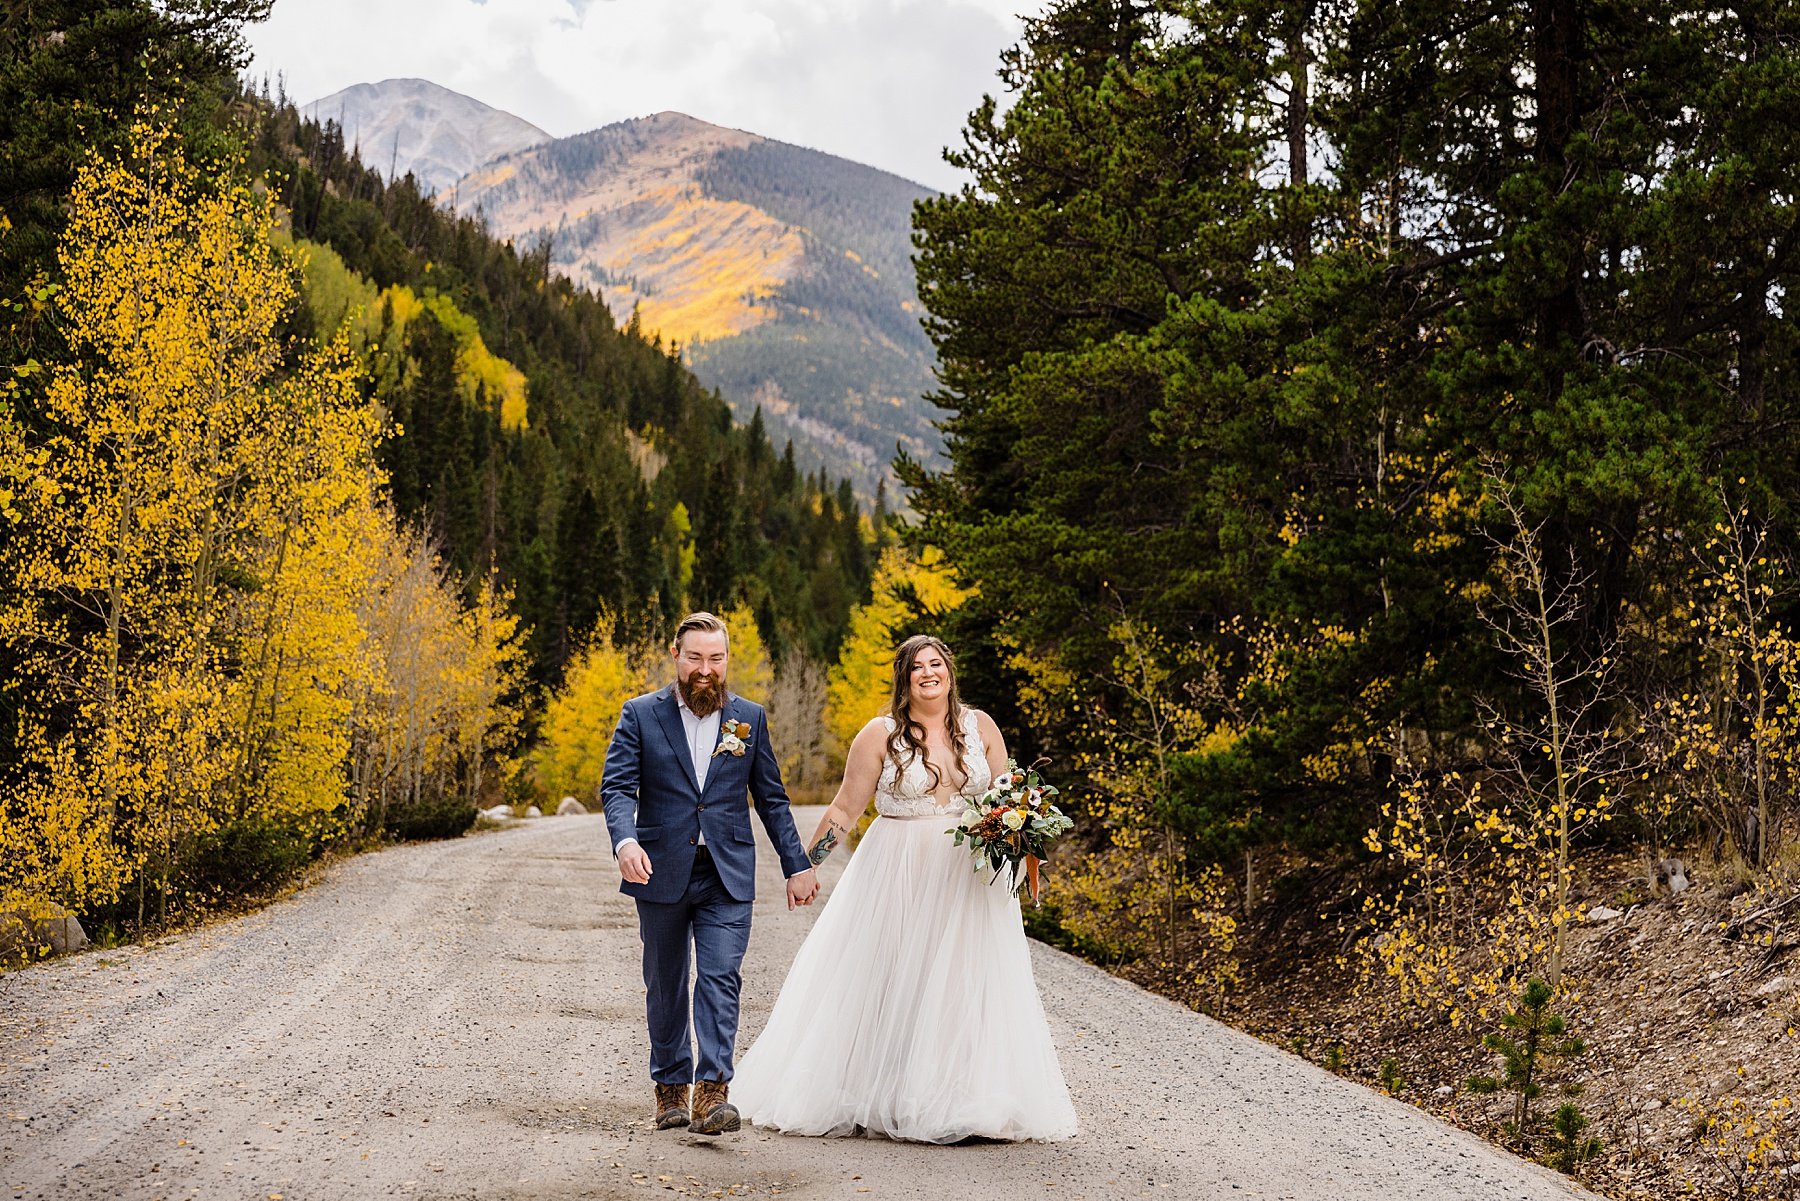 Jeep and Hiking Elopement in Colorado